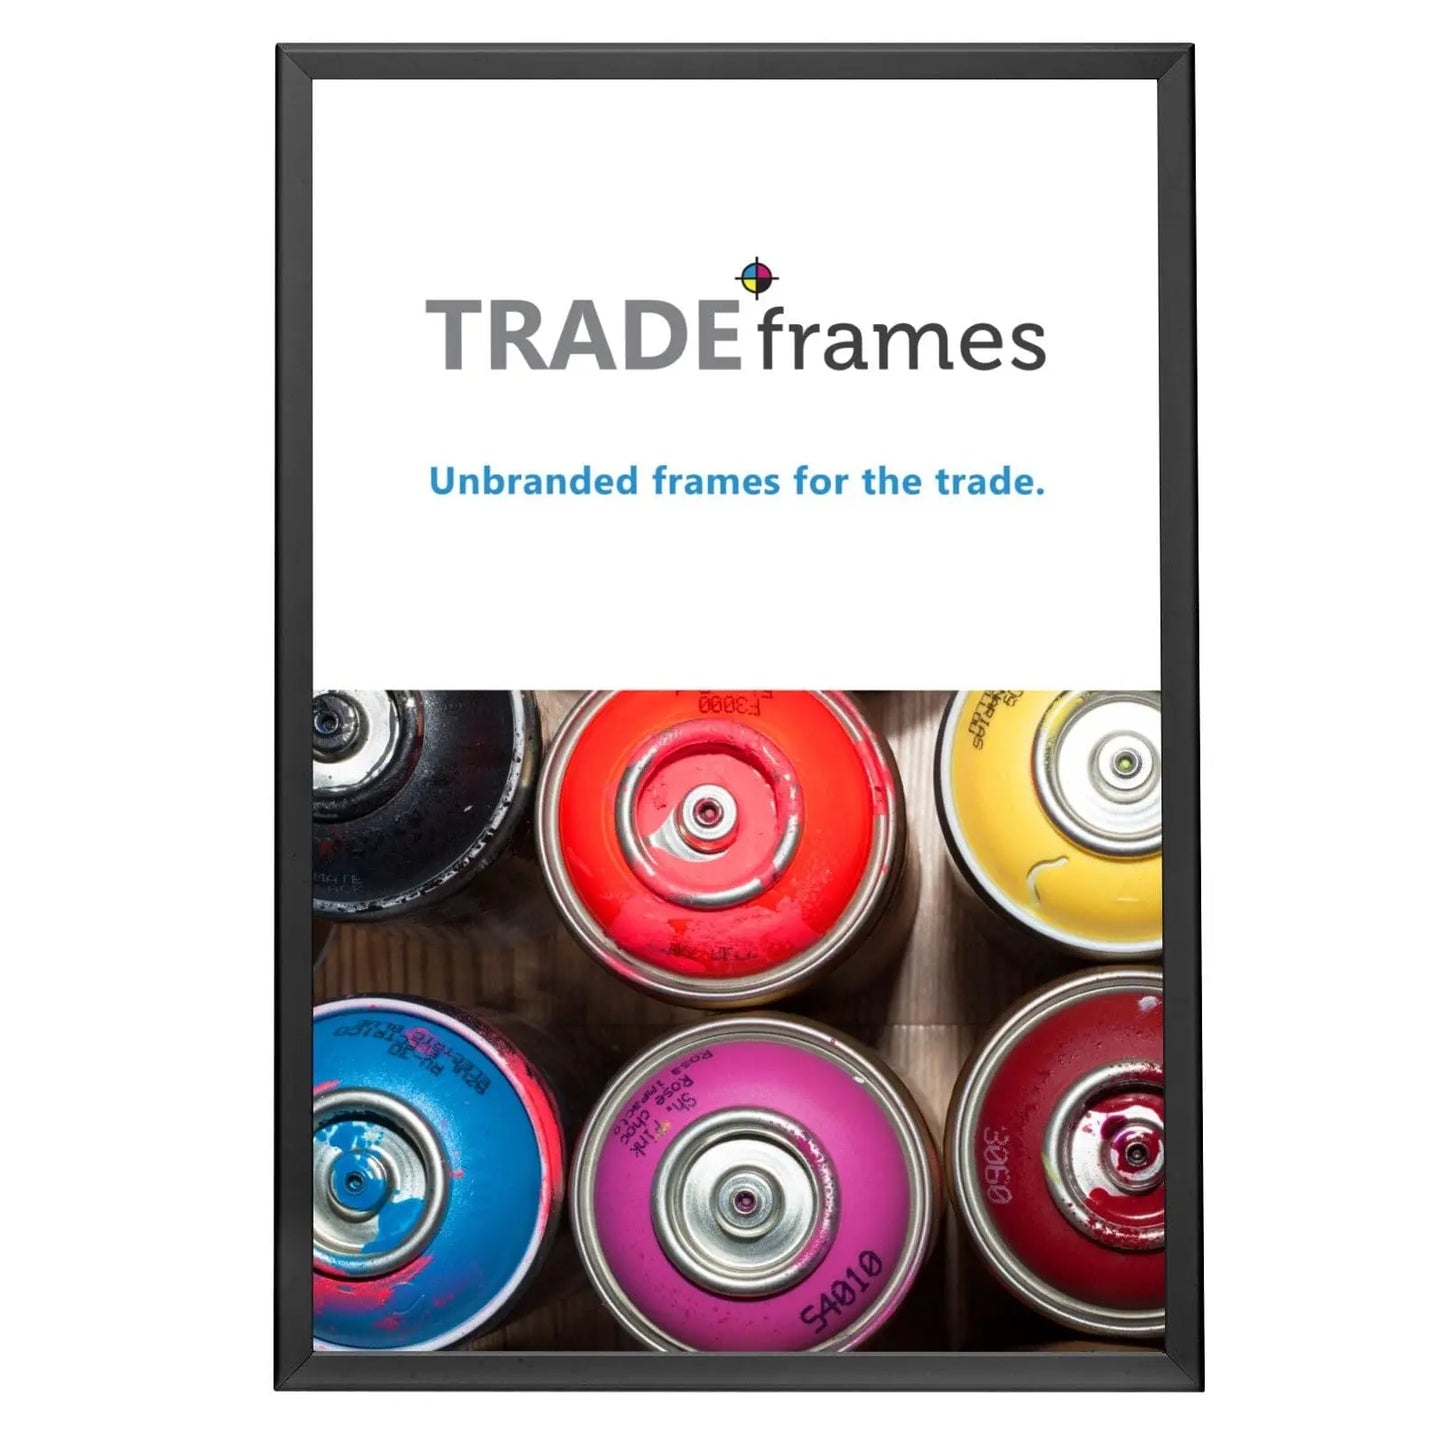 24x36 Inches Black Snap Frame - 1.25" Profile - Snap Frames Direct